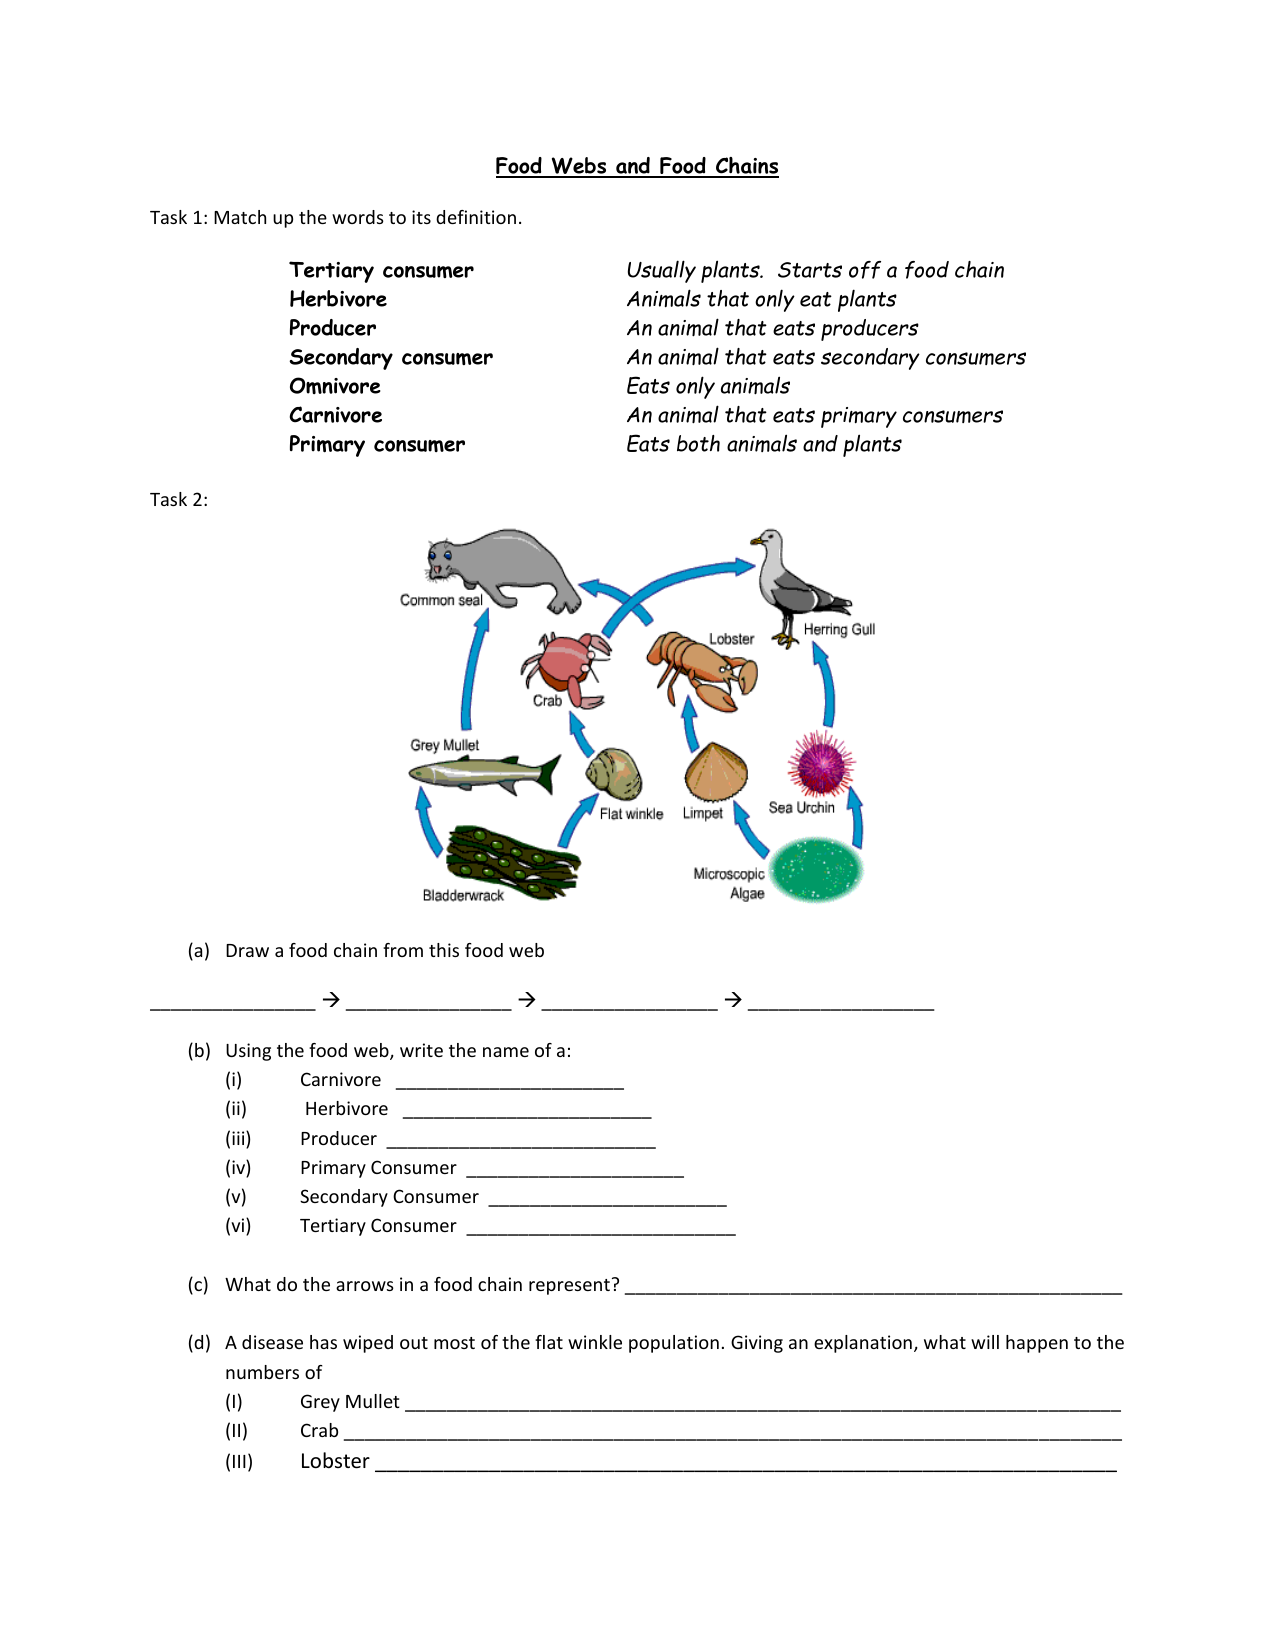 Food Chains and Webs worksheet Throughout Food Chains And Webs Worksheet